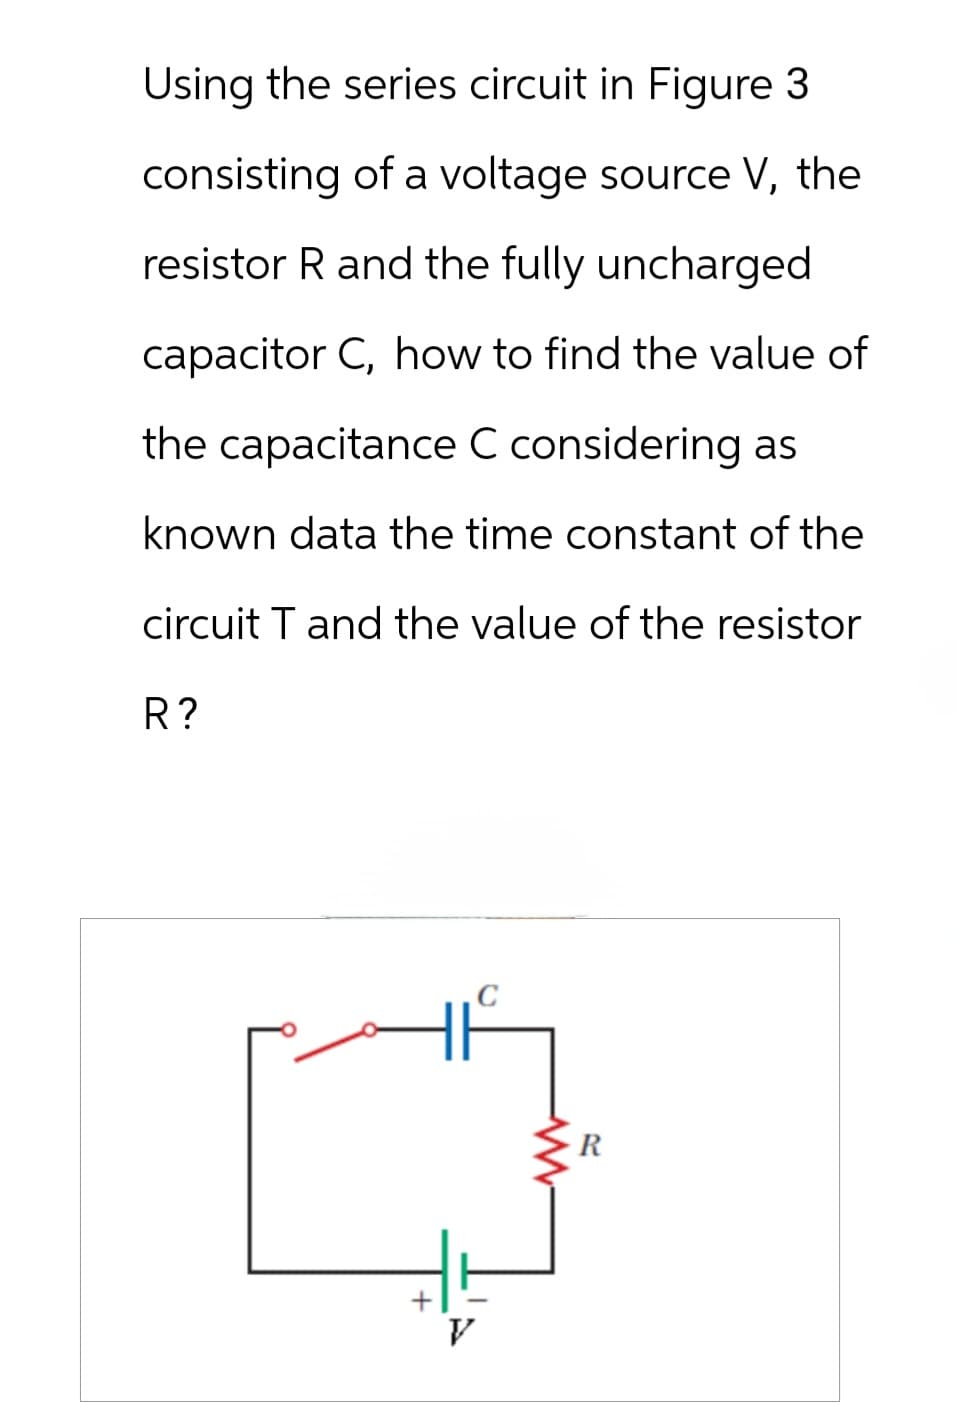 Using the series circuit in Figure 3
consisting of a voltage source V, the
resistor R and the fully uncharged
capacitor C, how to find the value of
the capacitance C considering as
known data the time constant of the
circuit T and the value of the resistor
R?
V
ww
R